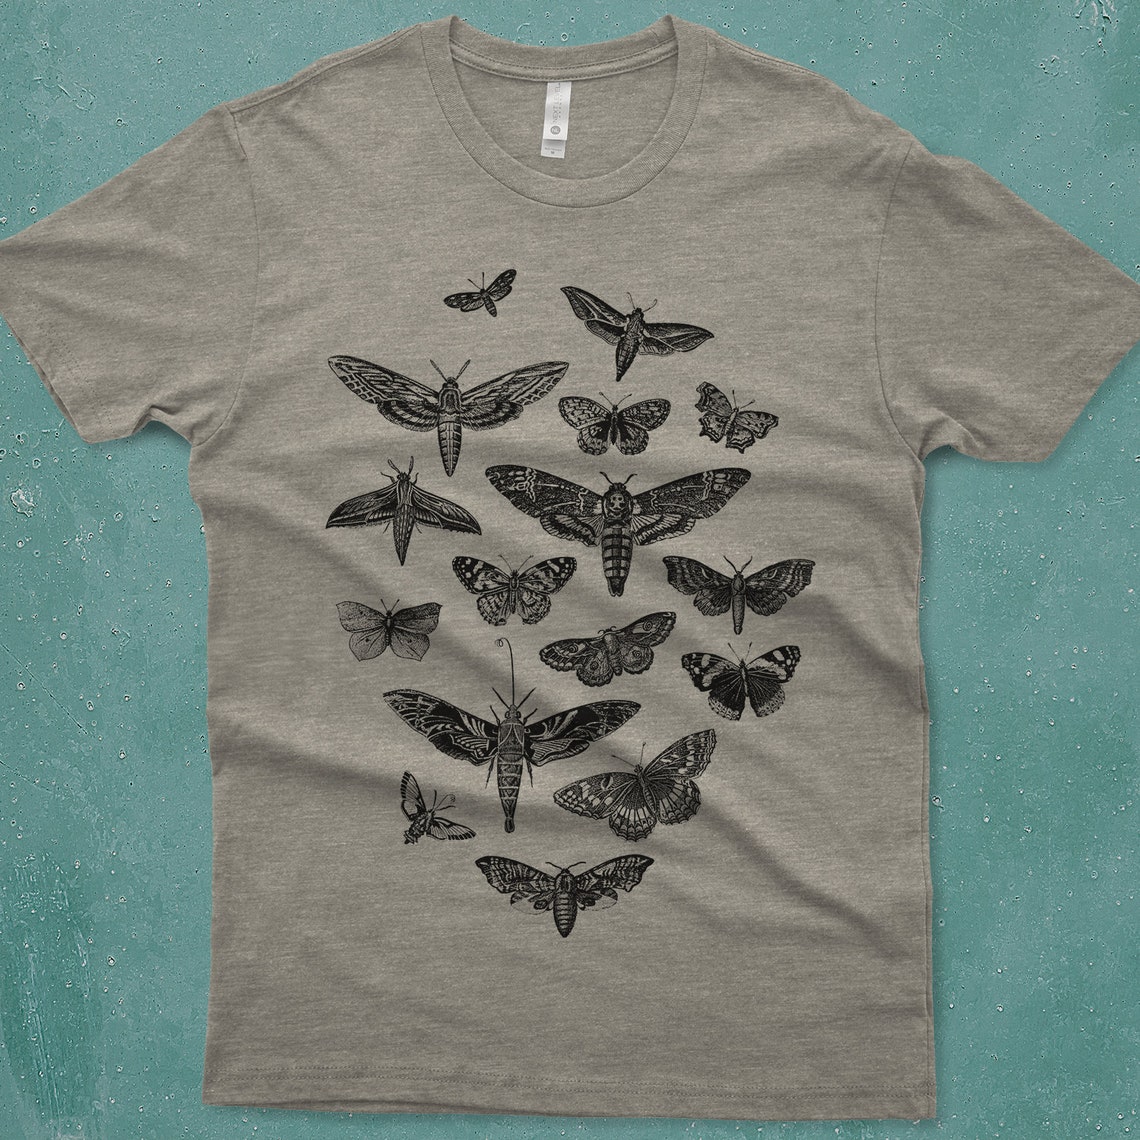 Moth Shirt Unisex Insect Tshirt Moths and Butterflies | Etsy